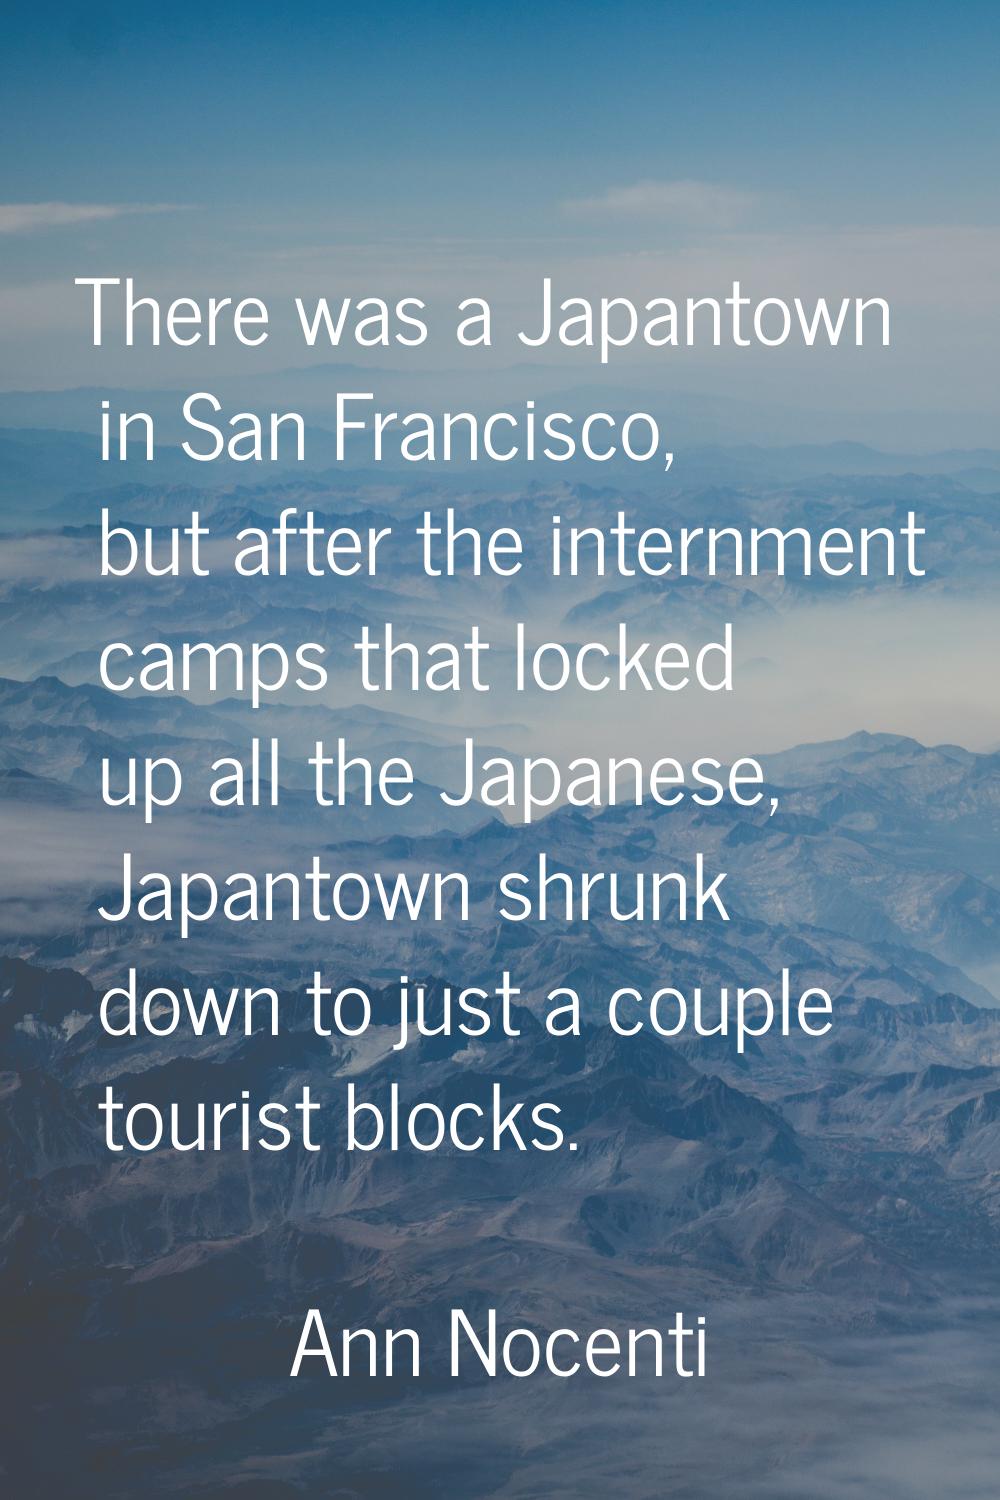 There was a Japantown in San Francisco, but after the internment camps that locked up all the Japan